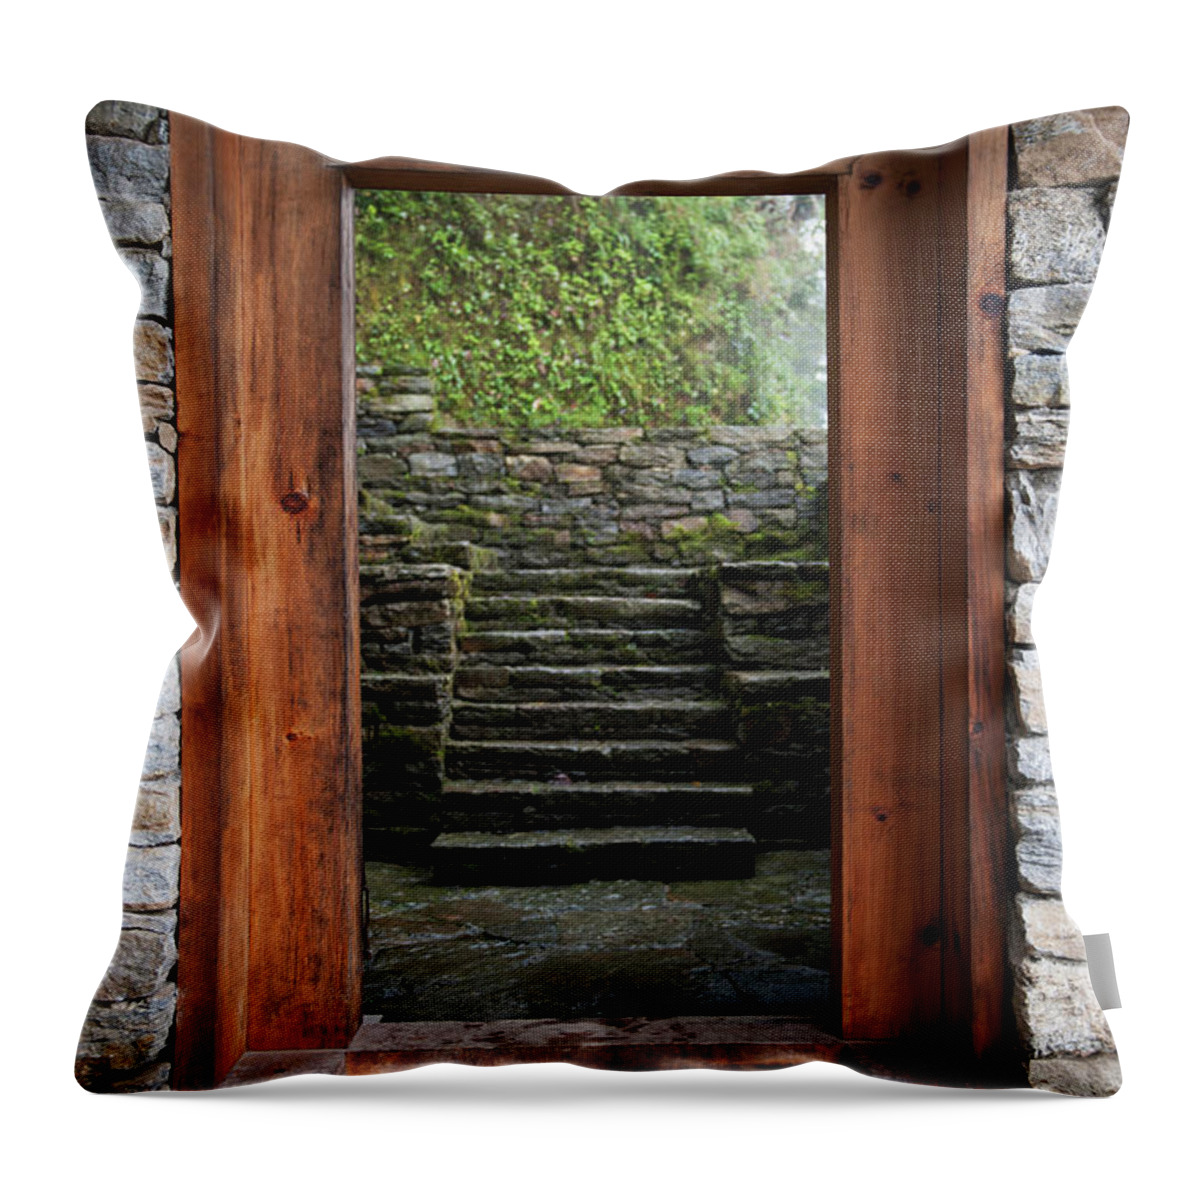 Steps Throw Pillow featuring the photograph A Wooden Doorway In Trongsa Museum by Design Pics / Keith Levit